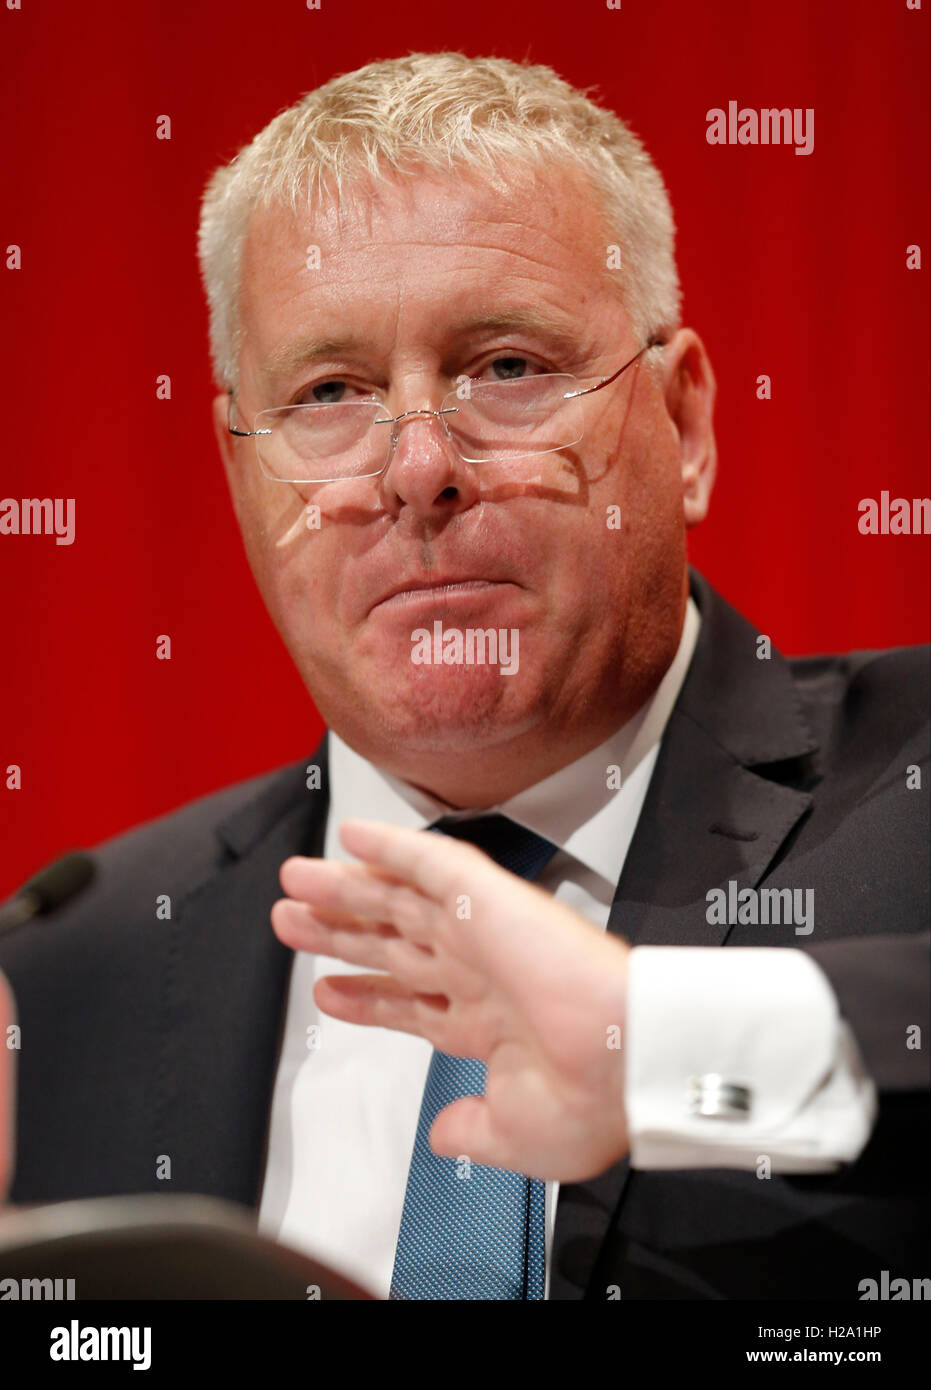 Ian Lavery Mp Shadow Minister For Trade Unions & Civil Society Labour Party Conference 2016 The Acc Liverpool, Liverpool, England 26 September 2016 Addresses The Labour Party Conference 2016 At The Acc Liverpool, Liverpool, England © Allstar Picture Library/Alamy Live News Credit:  Allstar Picture Library/Alamy Live News Stock Photo